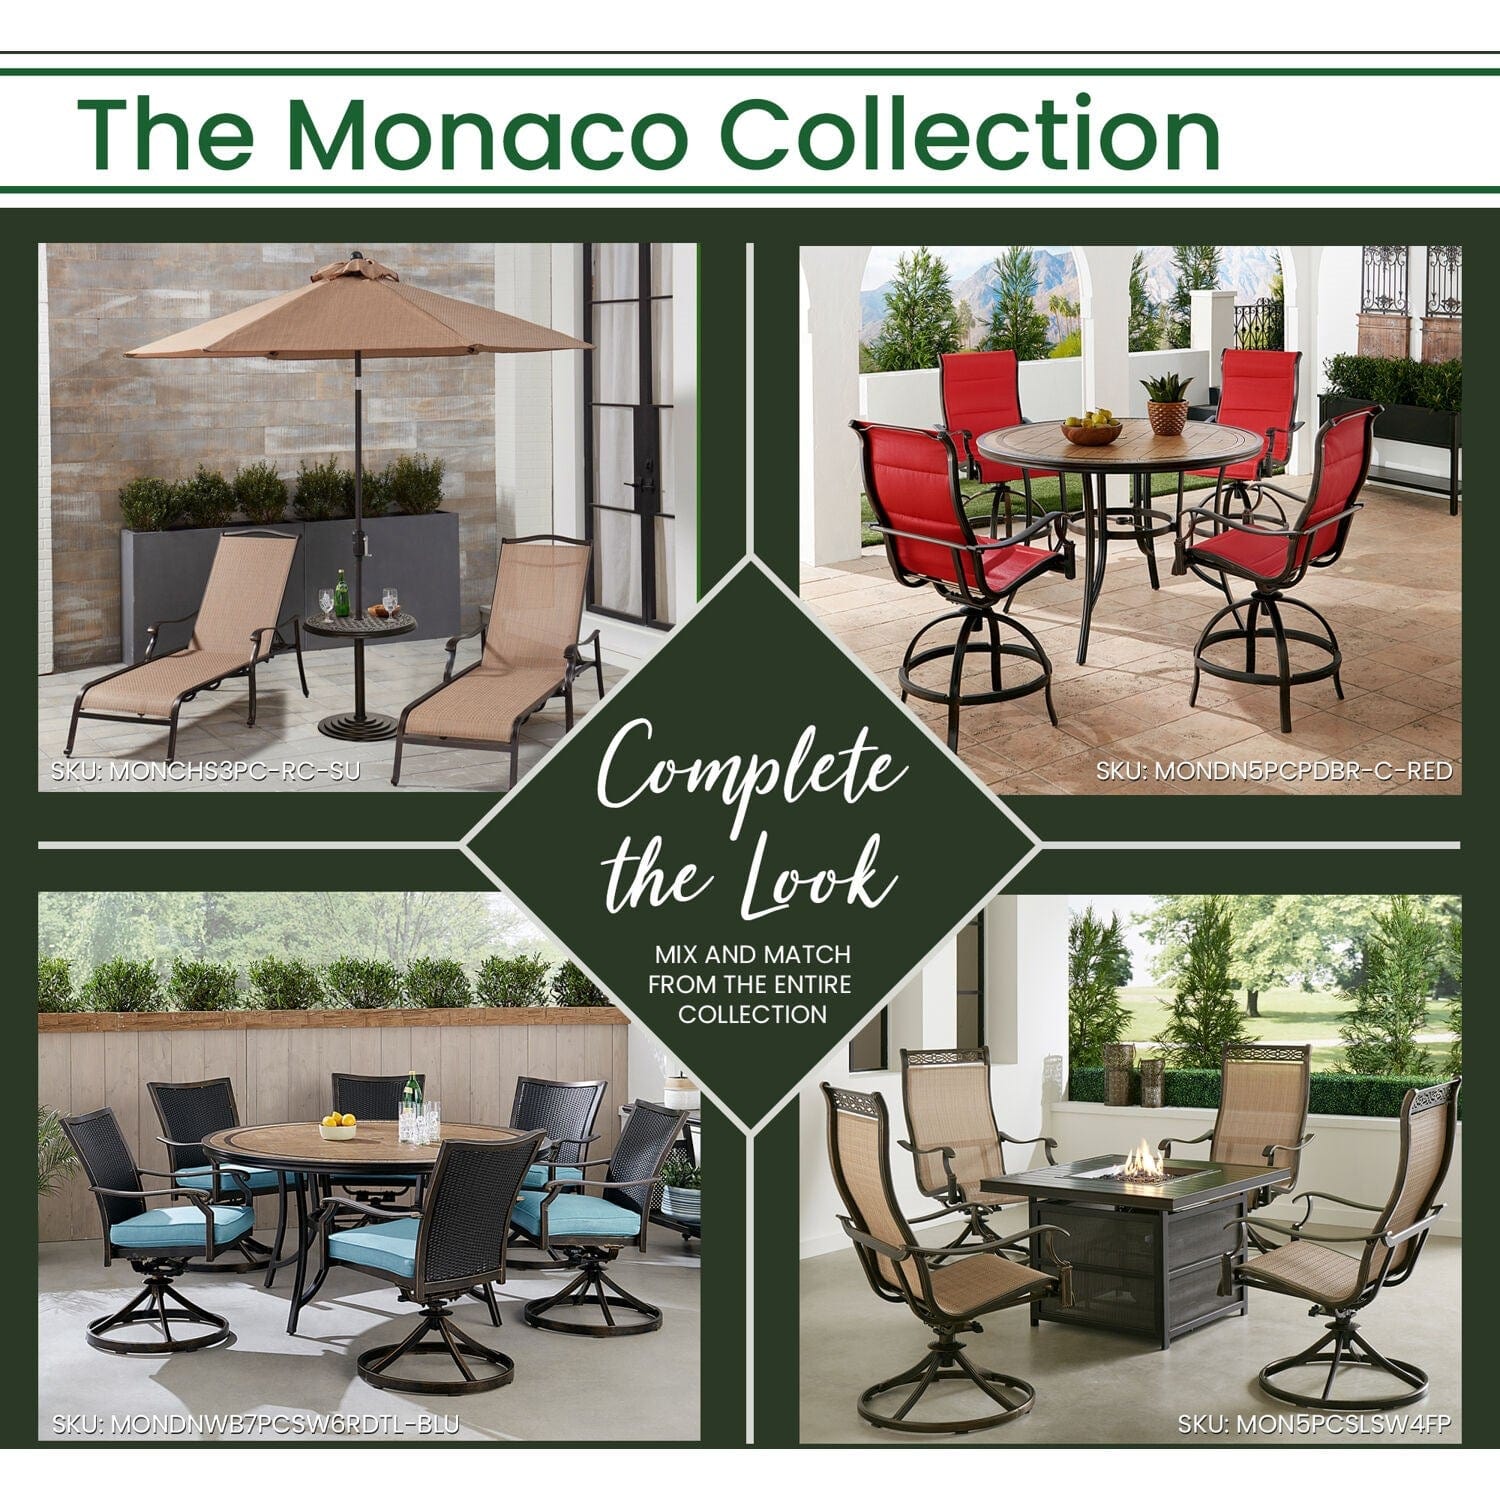 Hanover Outdoor Dining Set Hanover - Monaco 7-Piece Dining Set in Red with 4 Dining Chairs, 2 Swivel Rockers, and a 40" x 68" Tile-Top Table | MONDN7PCSW-2-RED